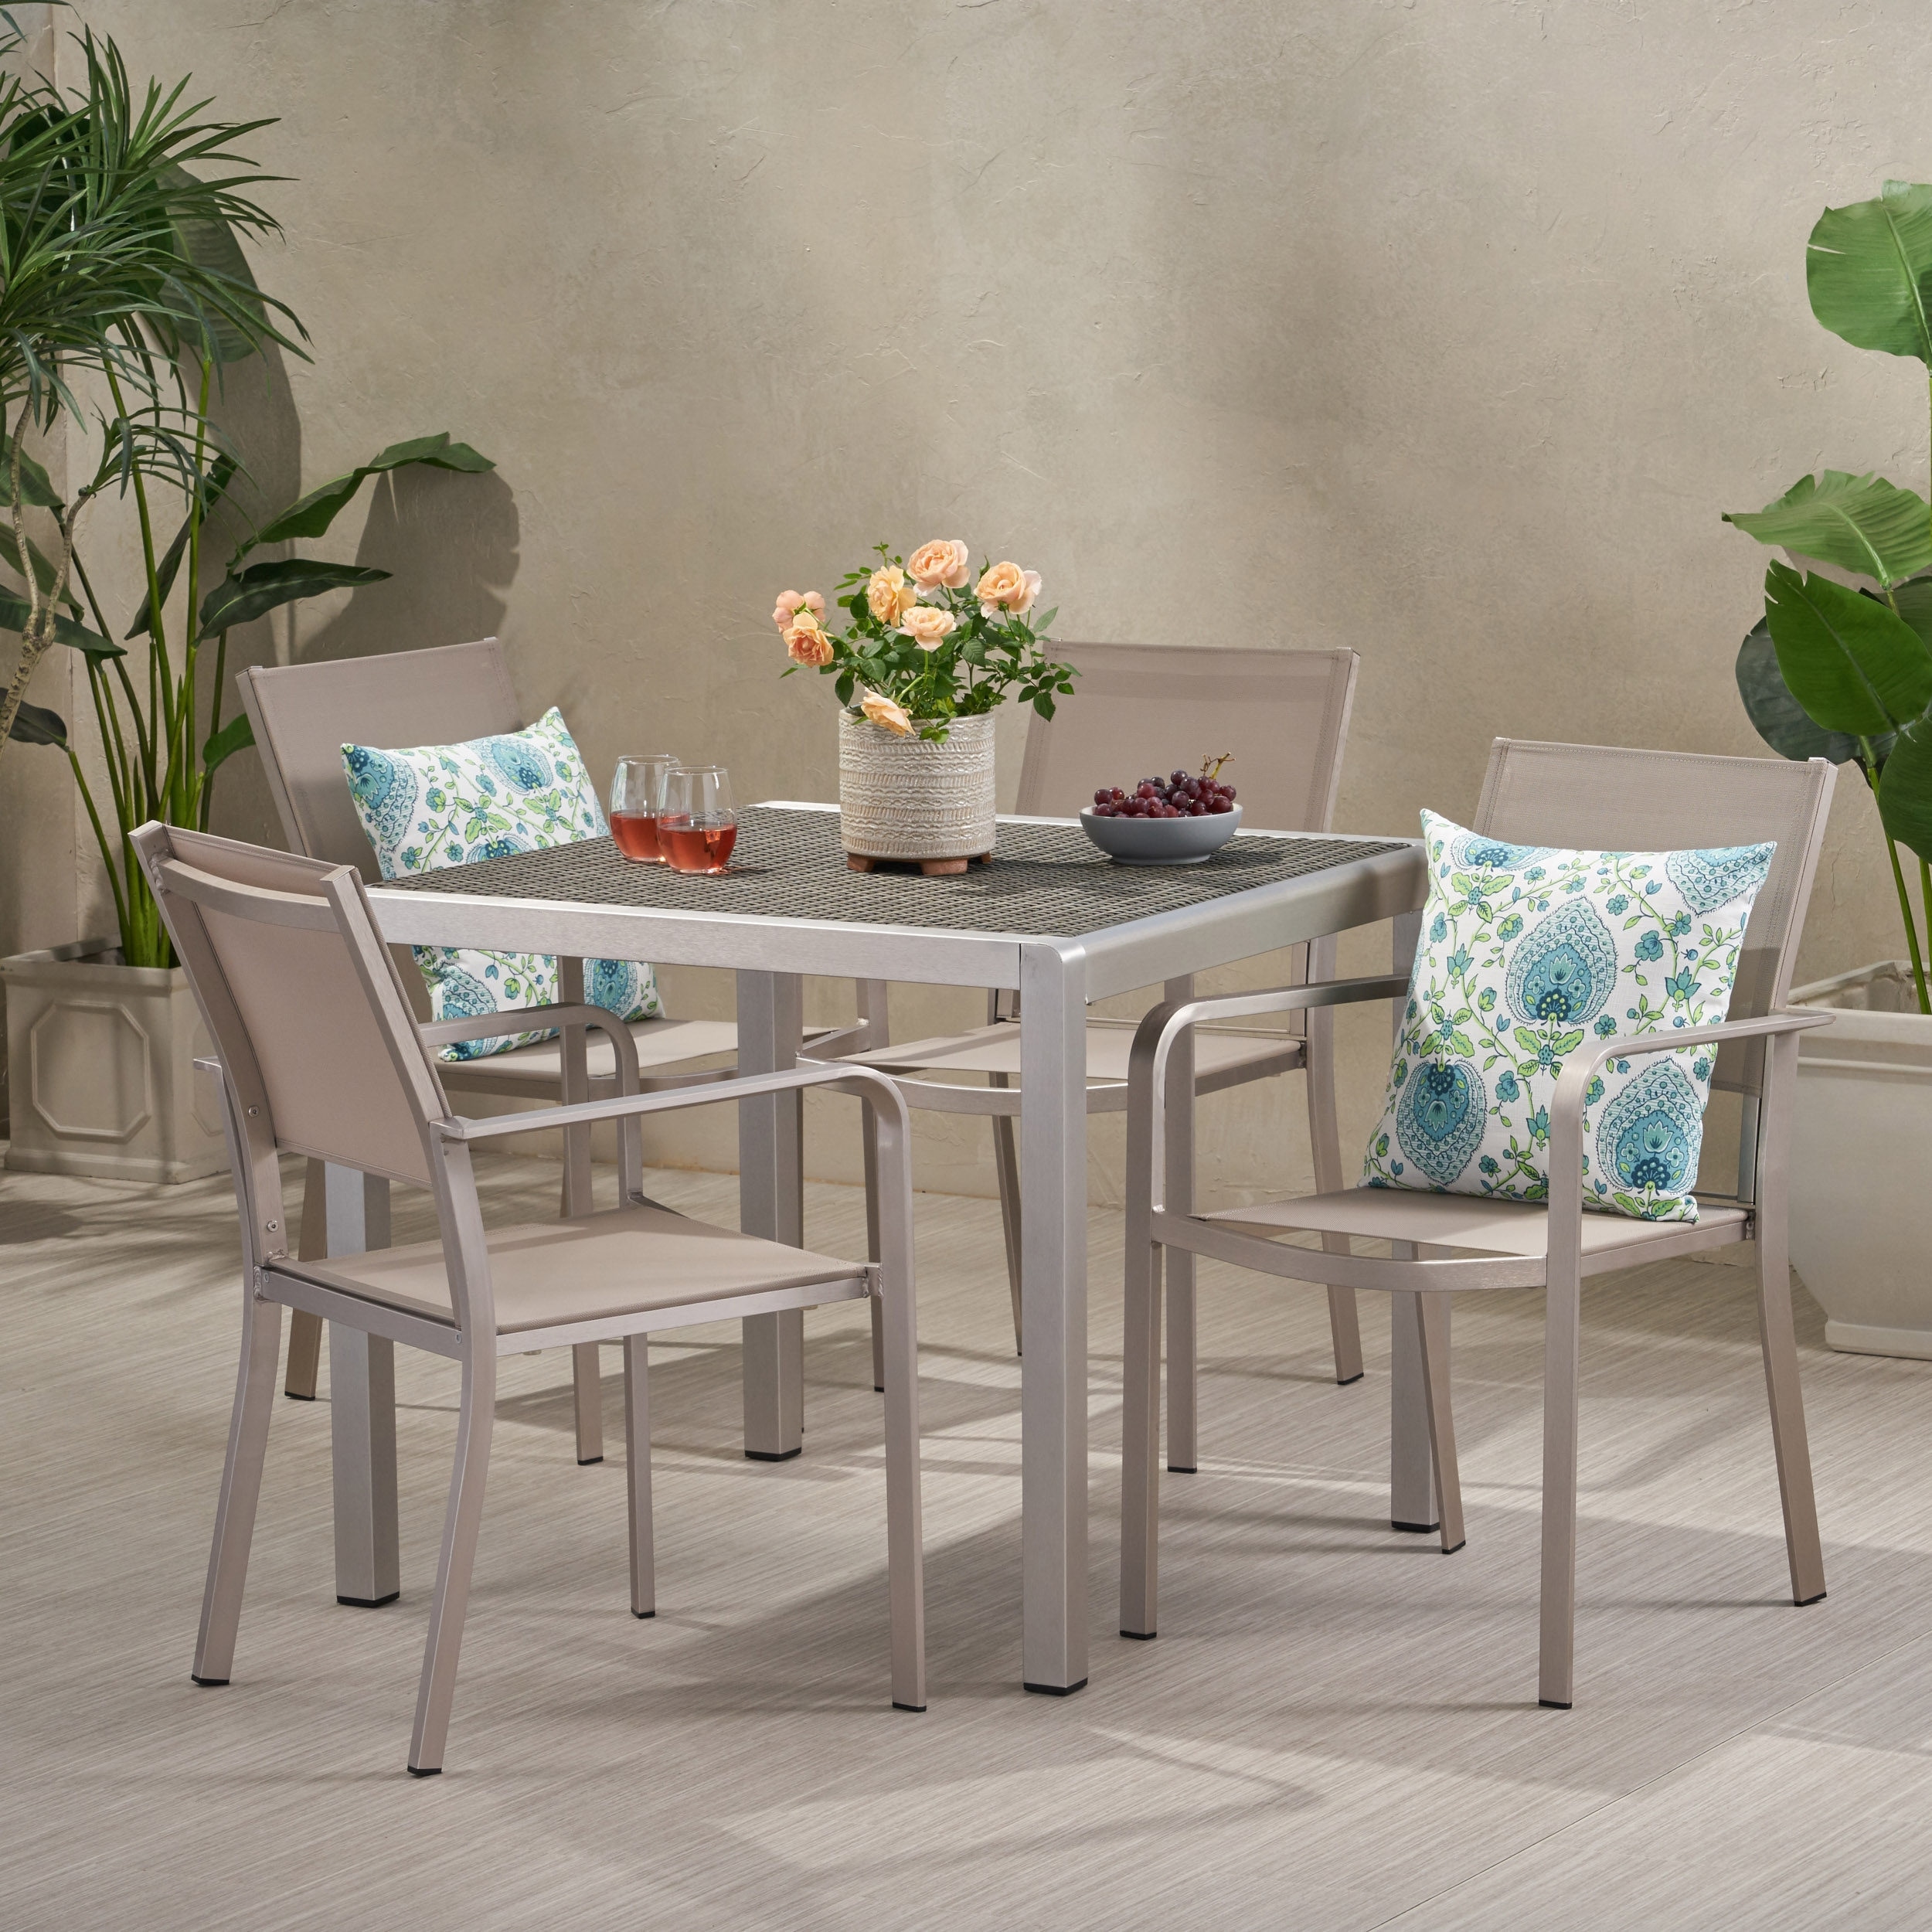 Boris Outdoor Modern 4 Seater Aluminum Dining Set With Wicker Table Top By Christopher Knight Home